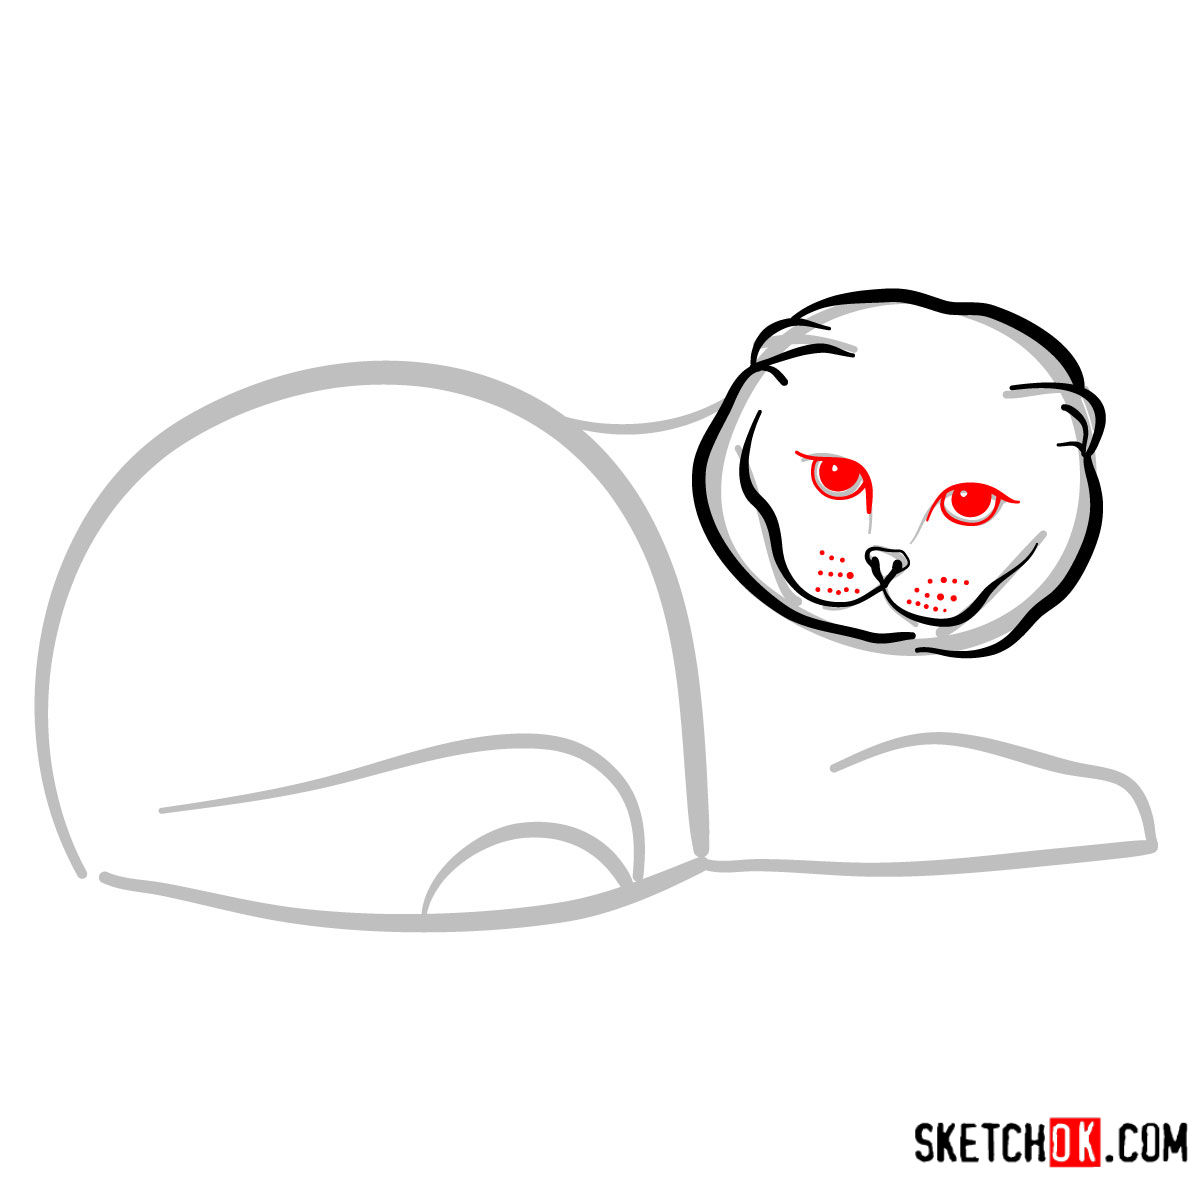 How to draw the Scottish Fold cat - step 05